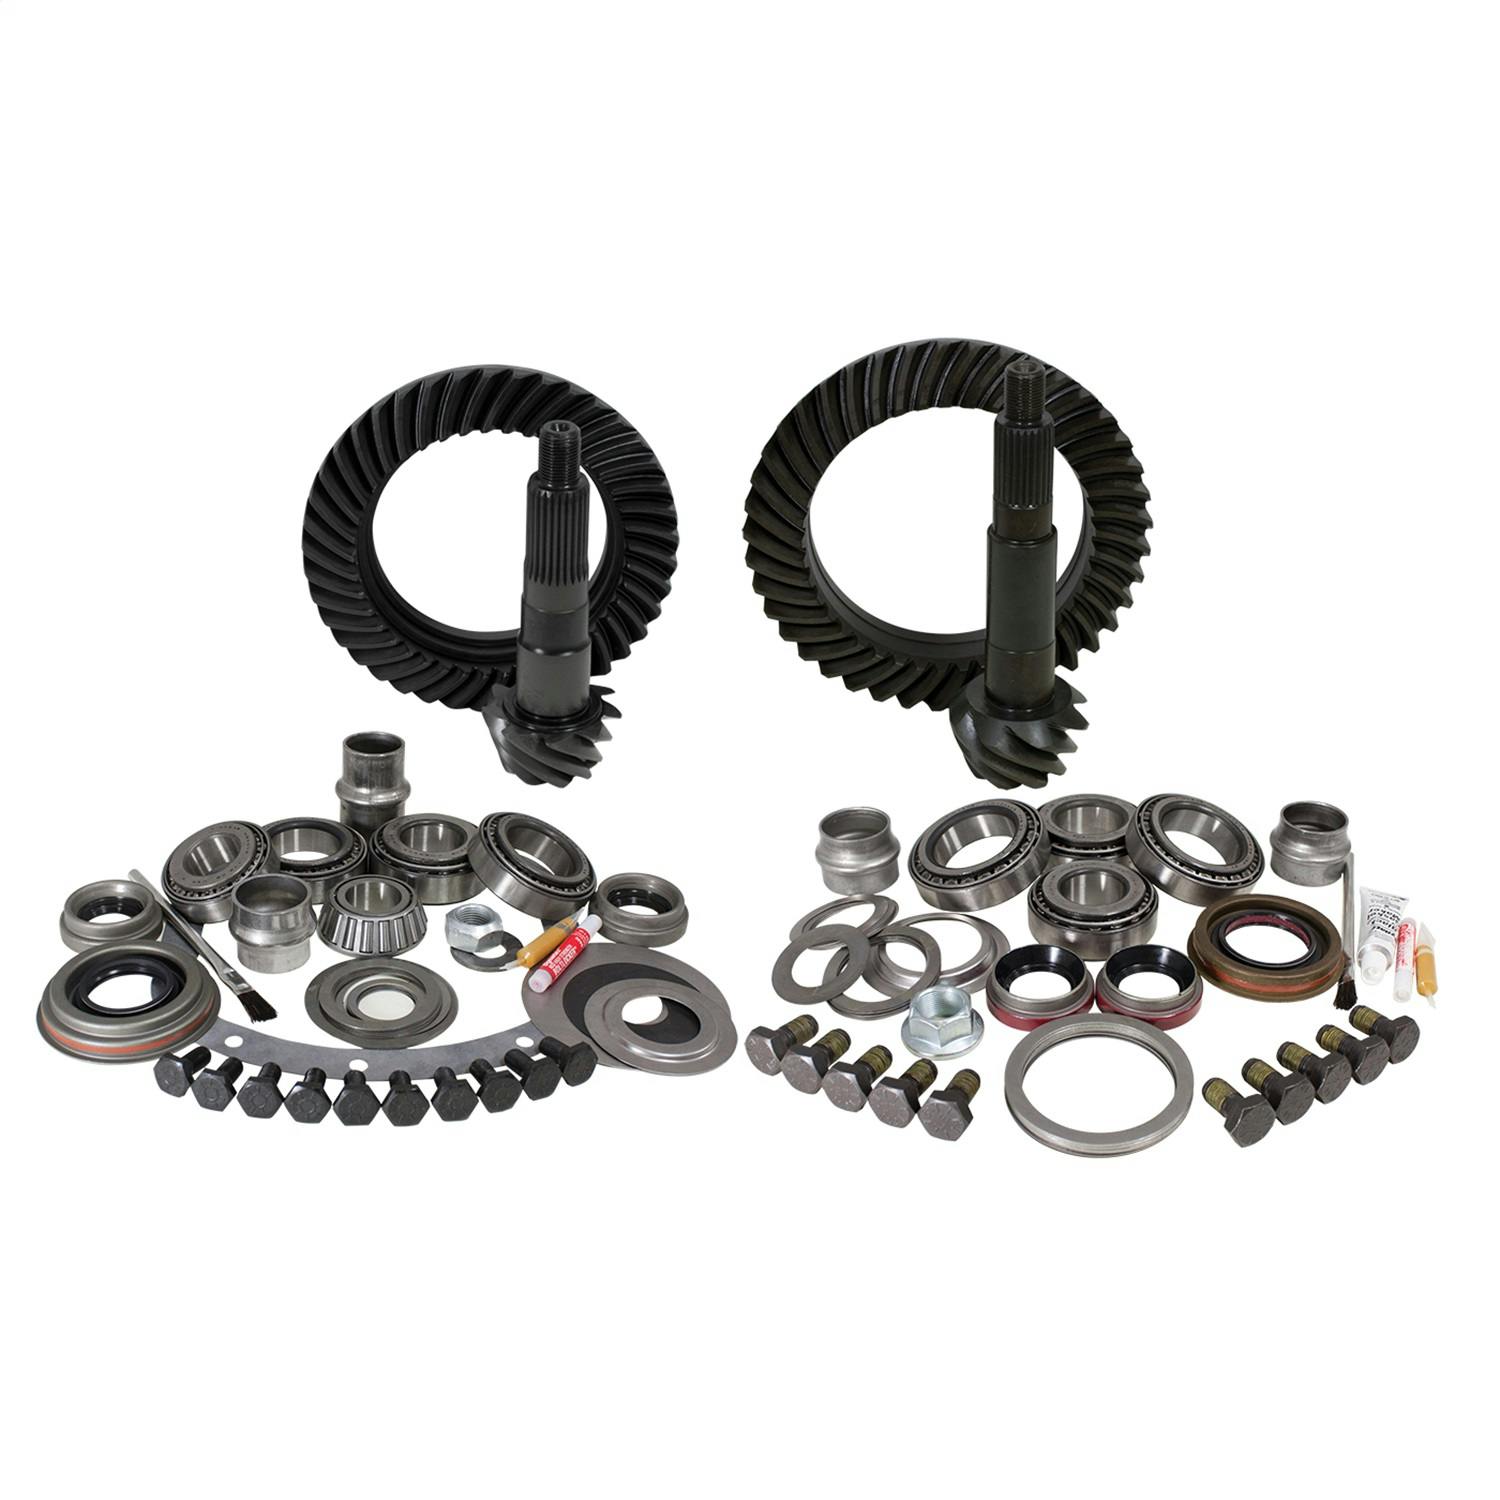 USA Standard Gear ZGK002 Ring And Pinion Set And Complete Install Kit